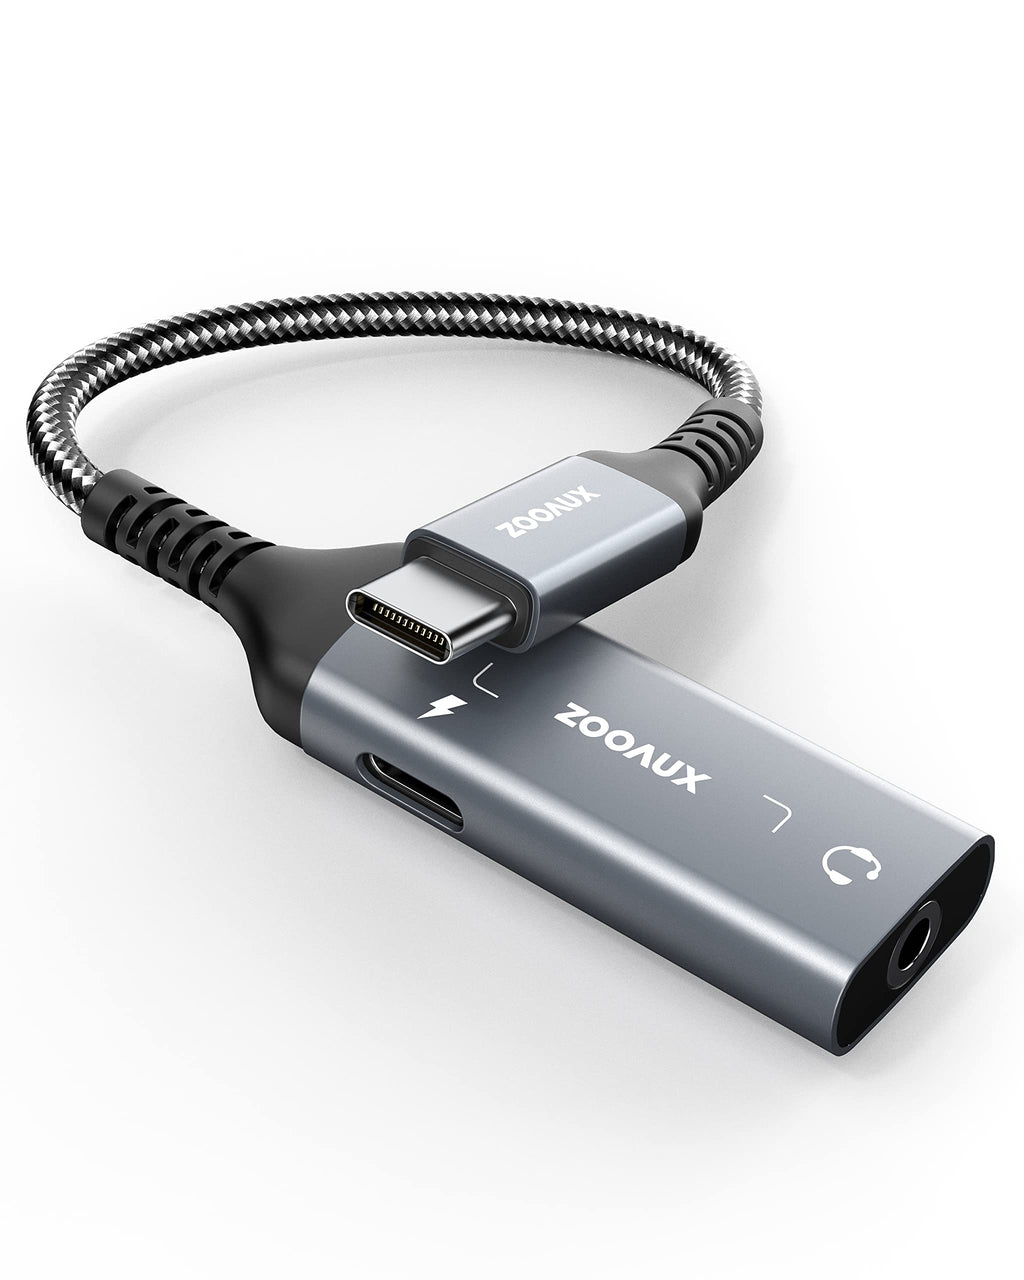  [AUSTRALIA] - [New Version] ZOOAUX USB Type C to 3.5mm Audio Adapter and Charger,2 in 1 USB C to Aux Audio Jack Splitter Hi-Res DAC and Fast Charging Dongle for Galaxy S22/S21/S20 Note 20/10,iPad Pro,Pixel 2/3/4 XL